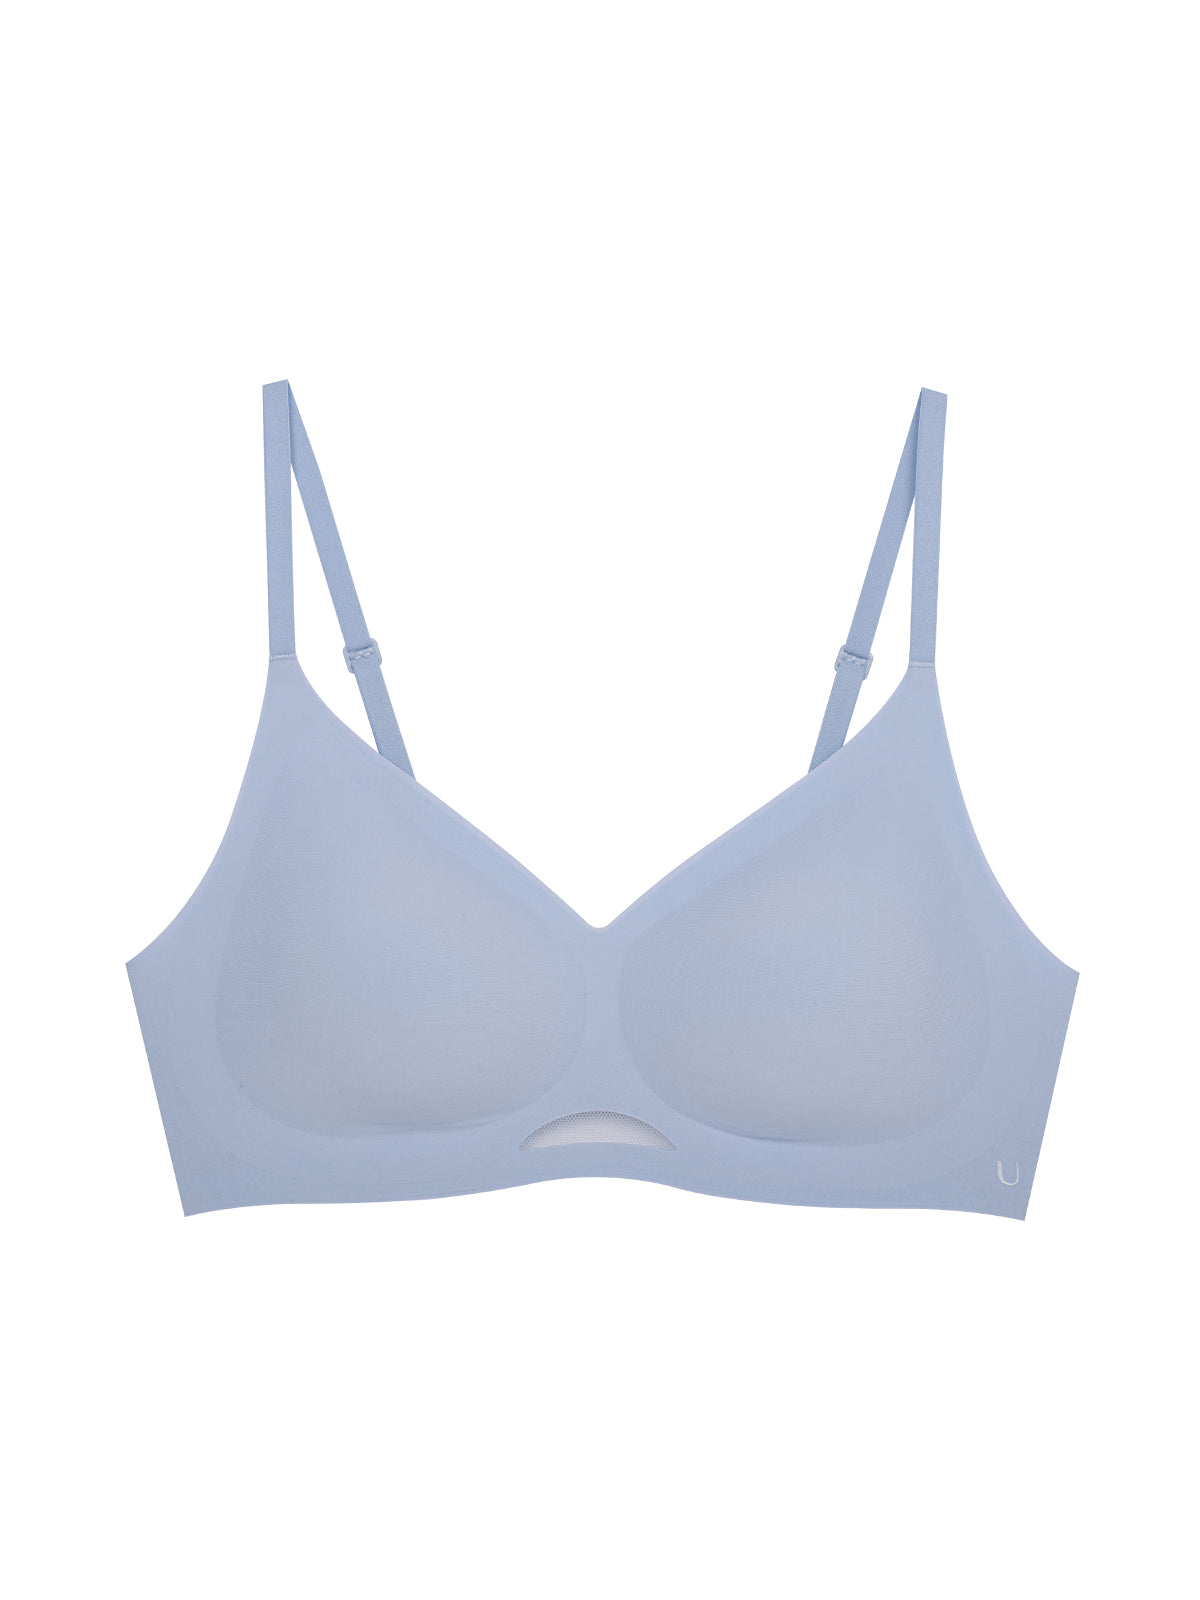 Buy Ubras Ug114079 Invisible Young Girls 8-13 Years Bra Breathable Growing  Girls Modal Bra from Ubras Co., Ltd, China